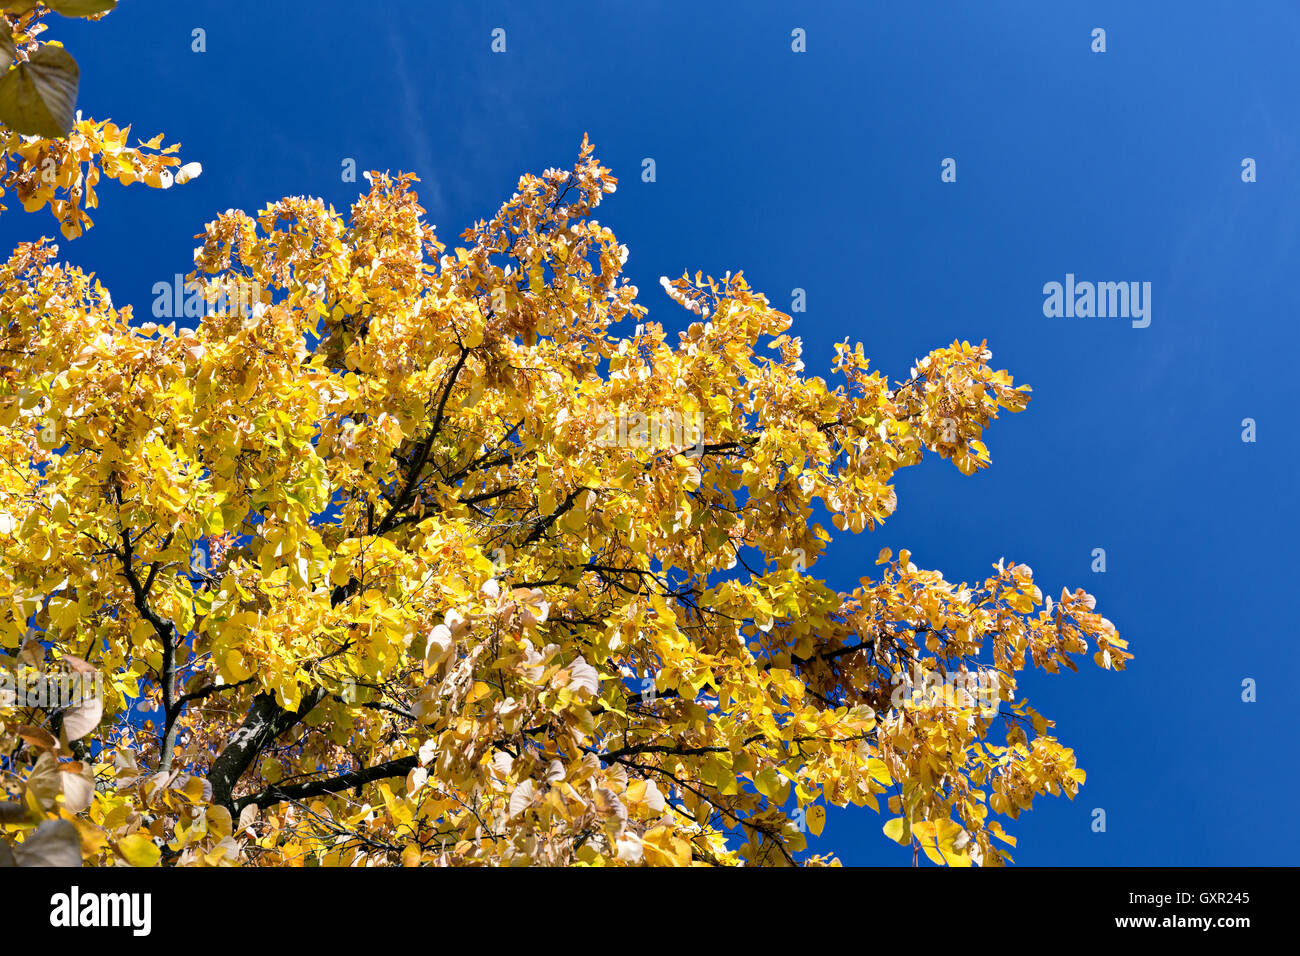 Linden tree with golden leaves in autumn against blue sky Stock Photo